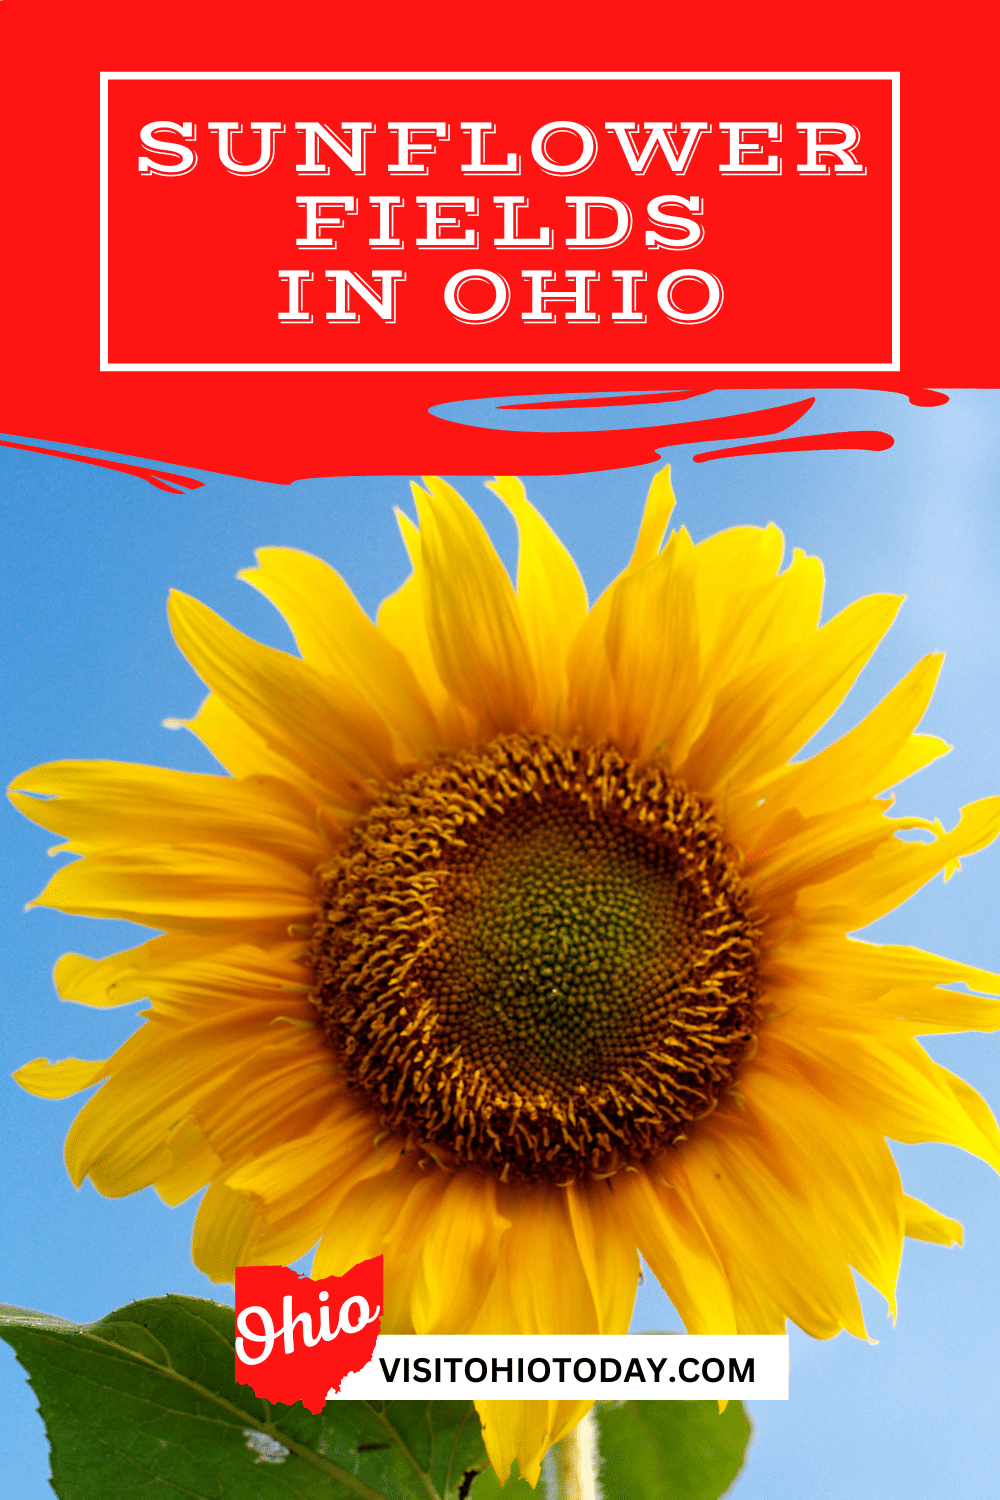 There is nothing better than spending some time in the Sunflower fields of Ohio. Sunflowers in Ohio are in bloom between August and September, so the window for visiting and picking is quite short - you need to plan ahead to enjoy this activity!